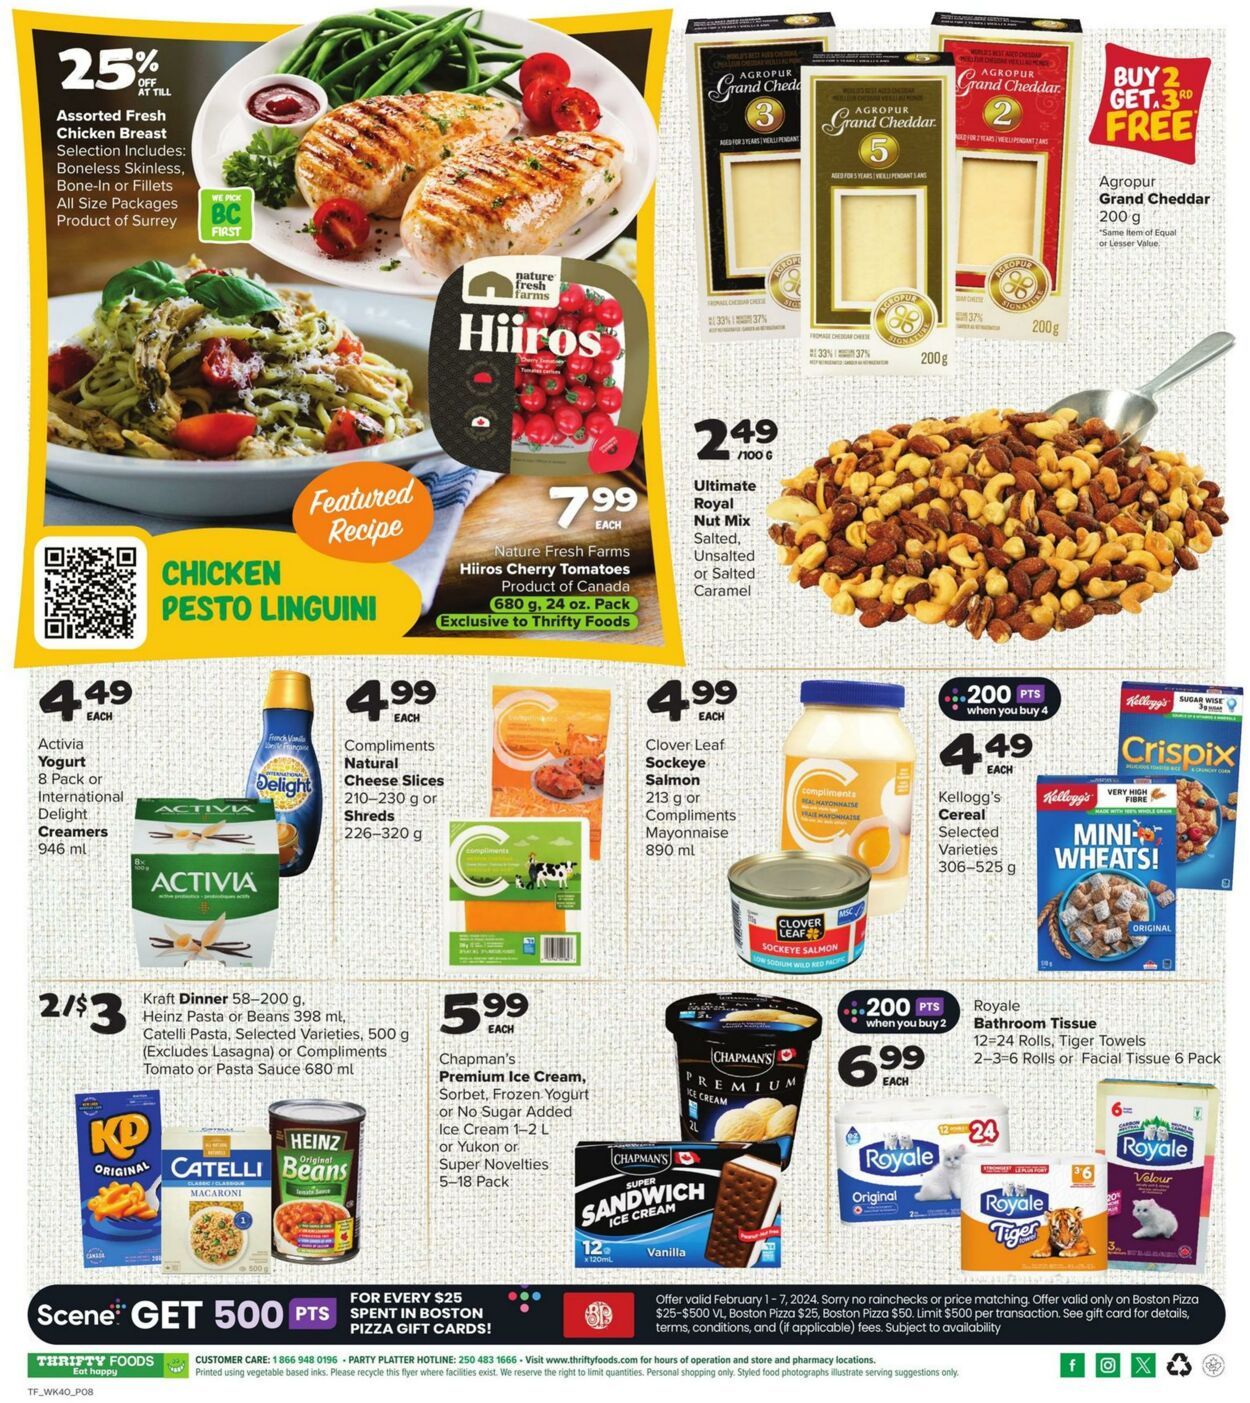 Flyer Thrifty Foods 01.02.2024 - 07.02.2024